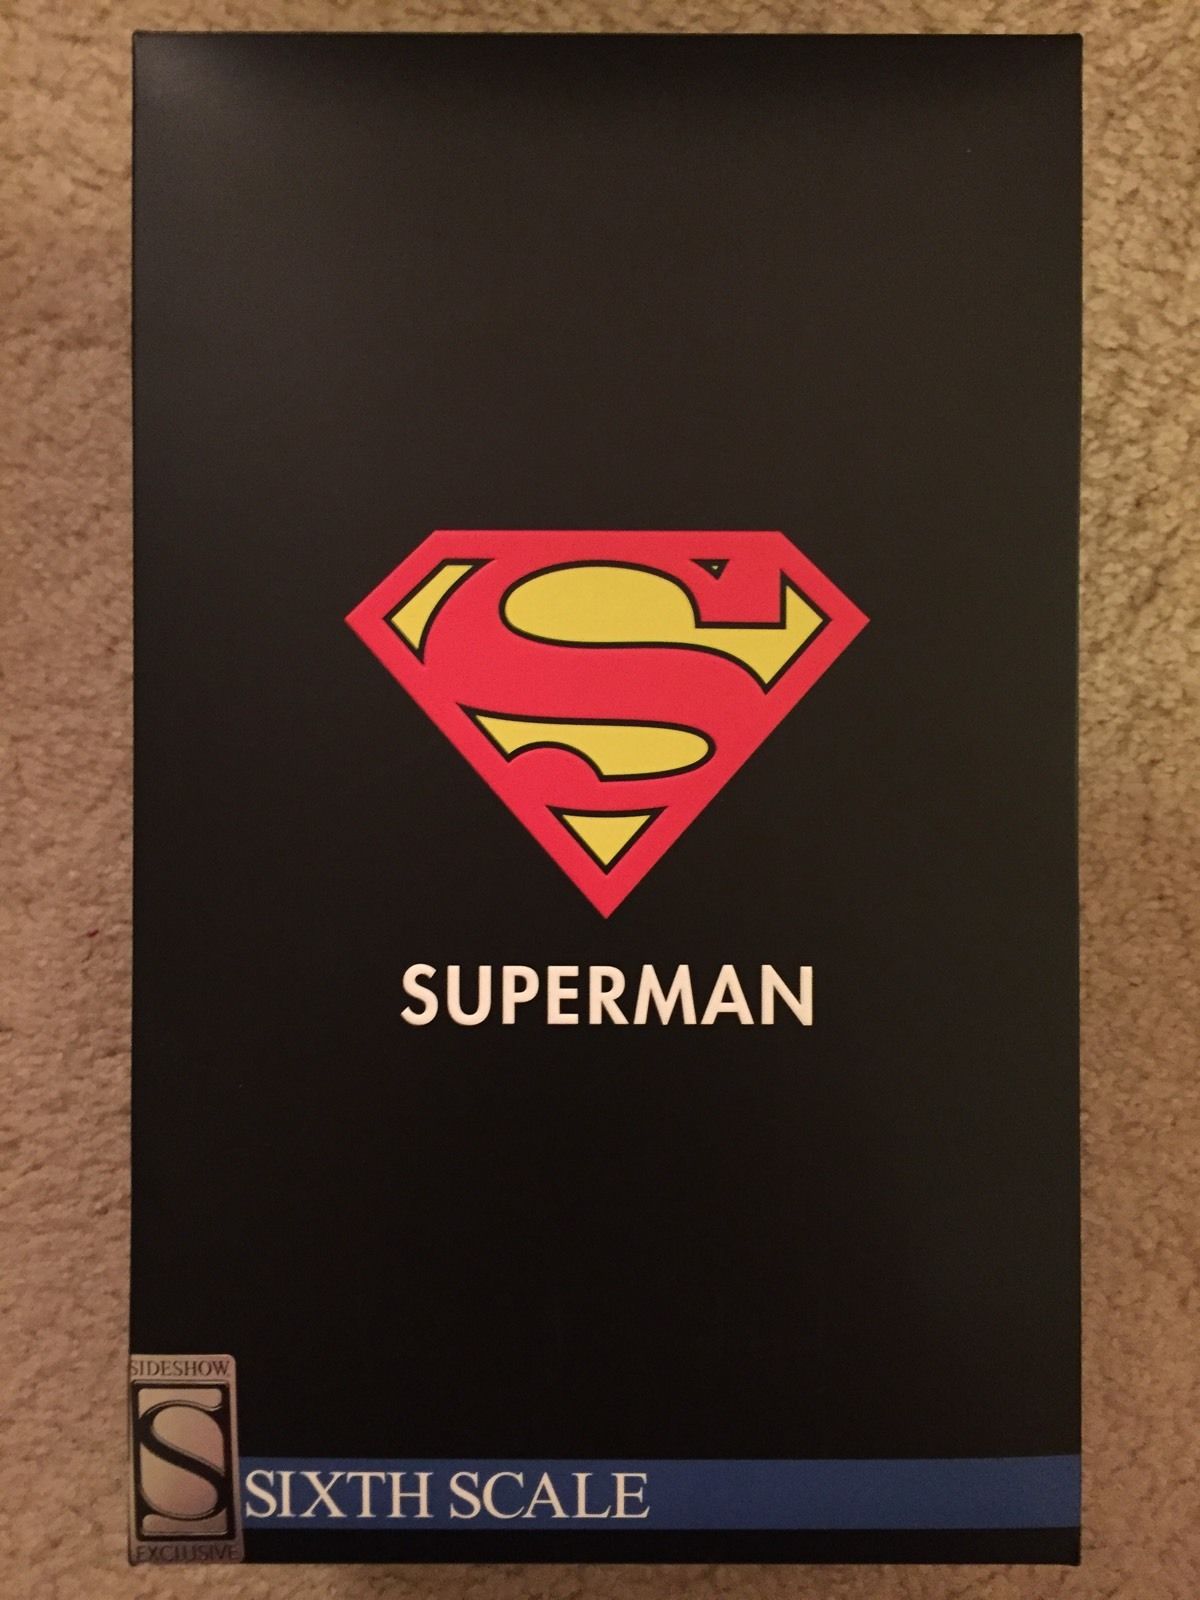 Sideshow EXCLUSIVE Sixth Scale Superman Figure - SOLD OUT, Never Been Displayed